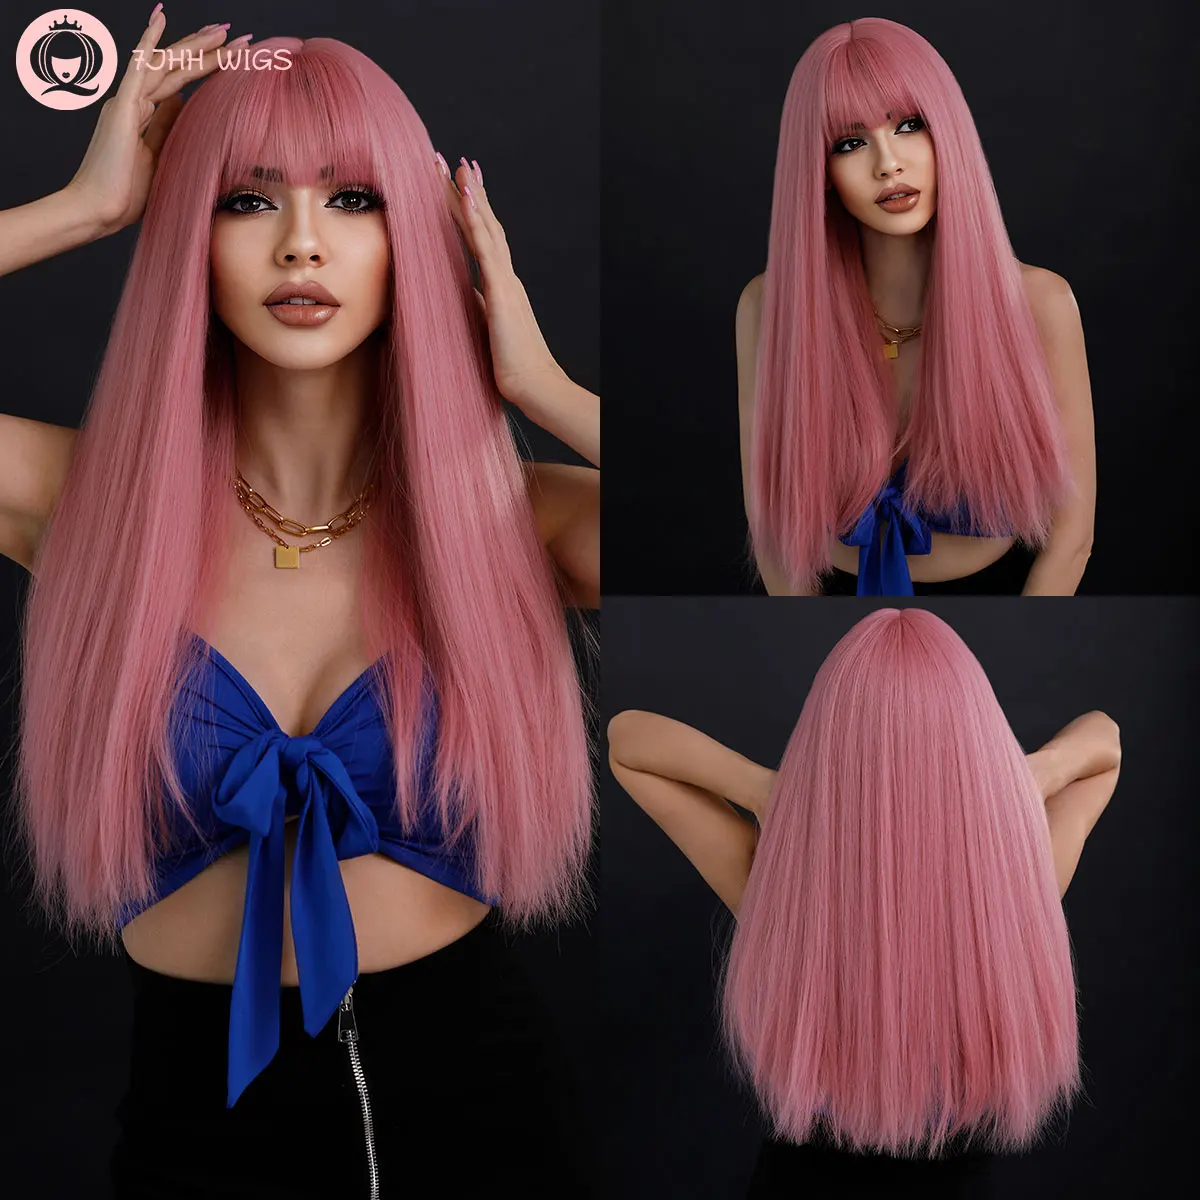 Tanie 7JHH WIGS Light Pink Wig with Bang Straight Wig for Women Synthetic